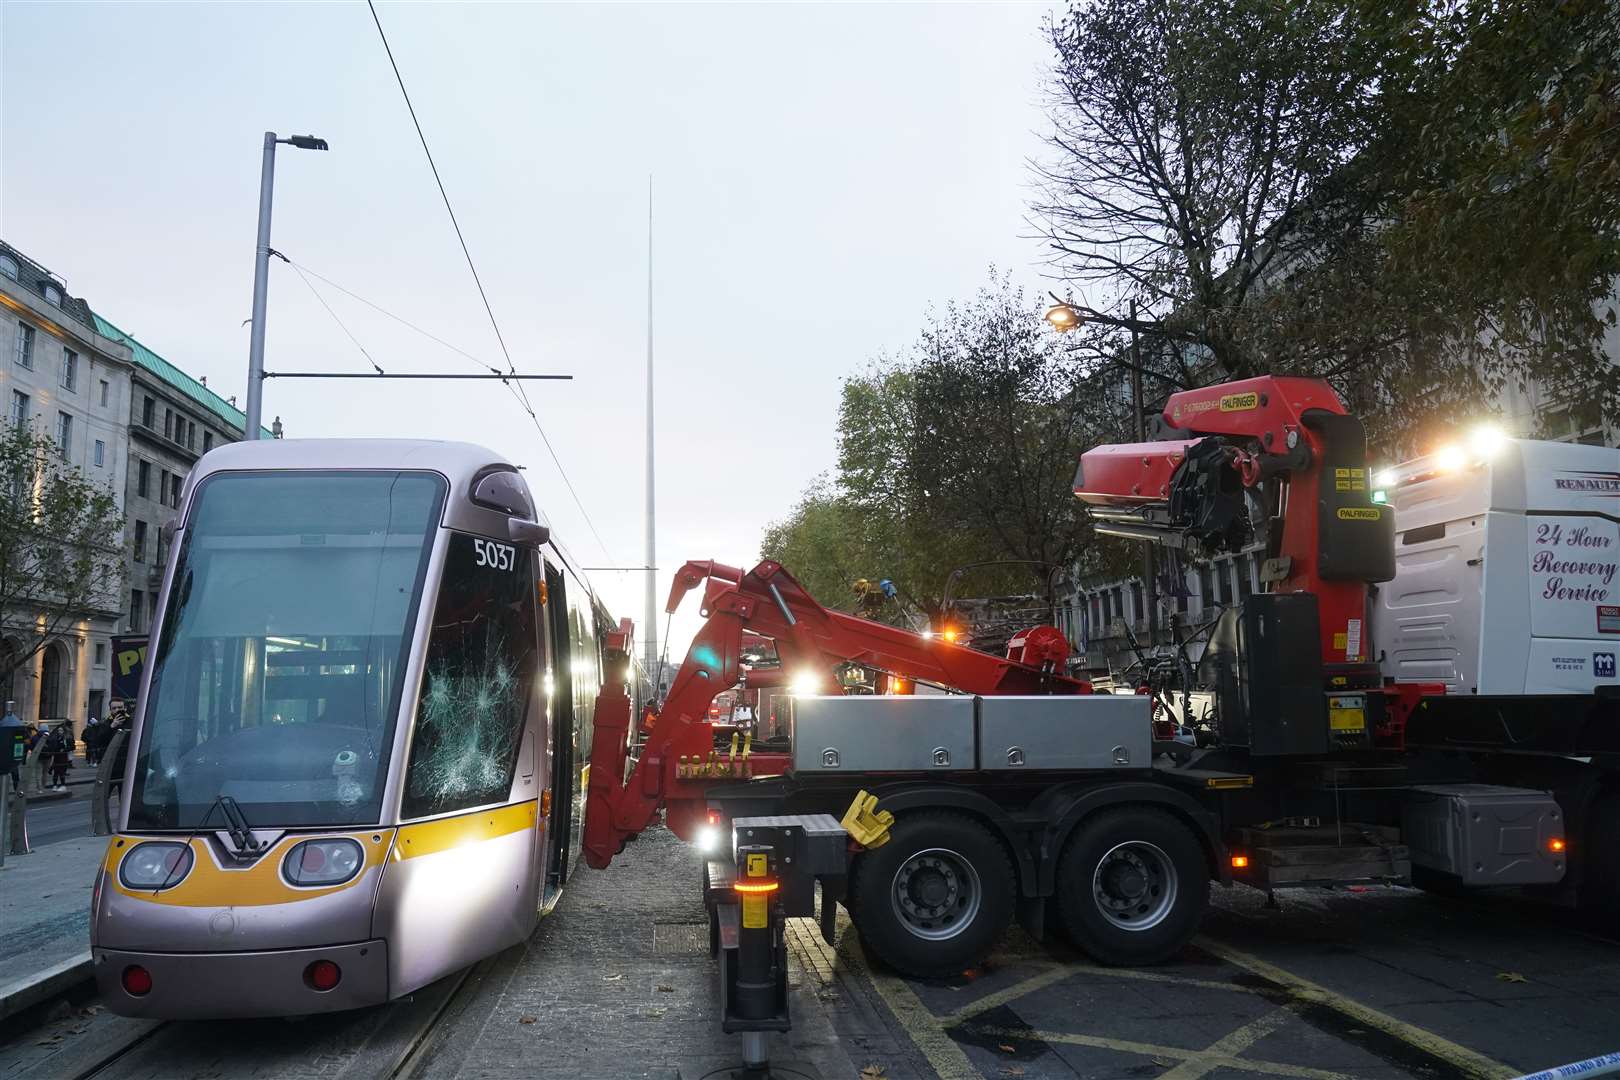 A damaged Luas with broken windows is removed from the tracks in Dublin, the morning after violent scenes unfolded in the city centre (Brian Lawless/PA)